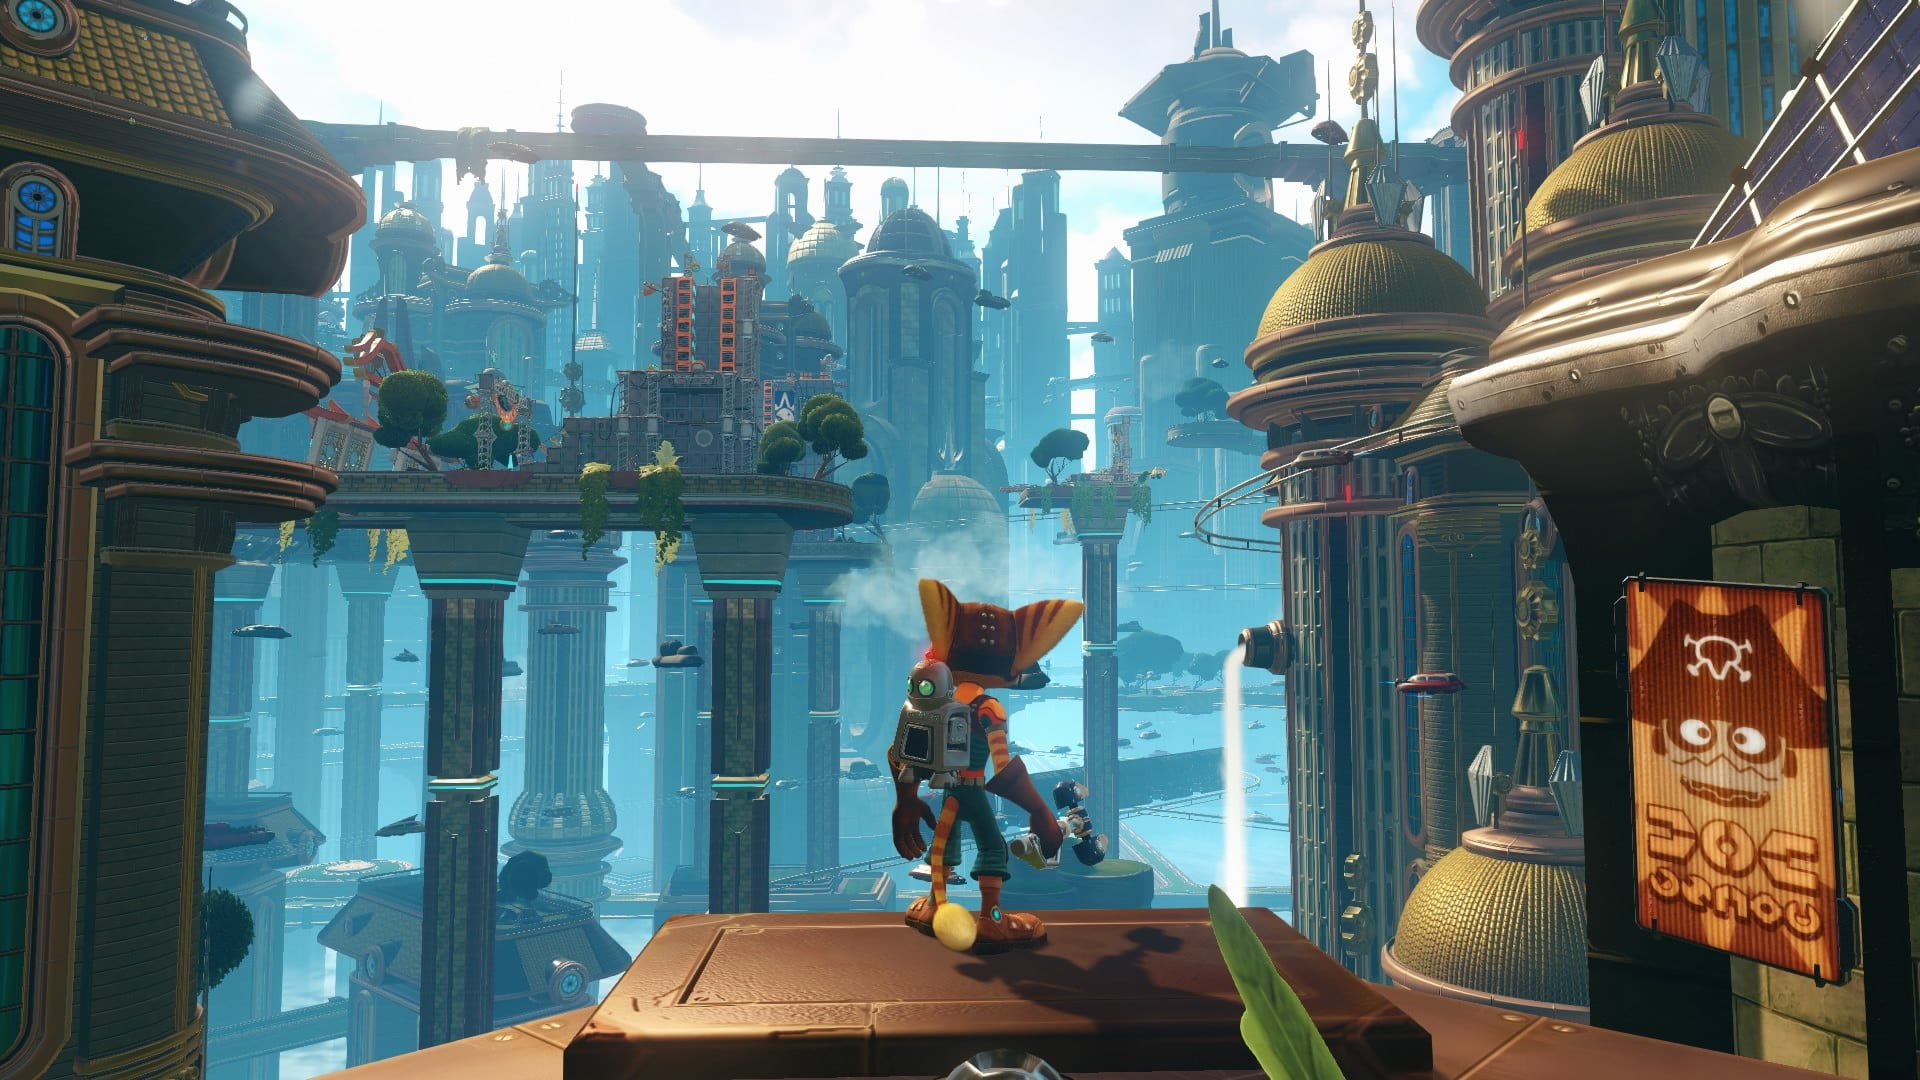 mobile game application, Ratchet & Clank, video games, screen shot, science fiction